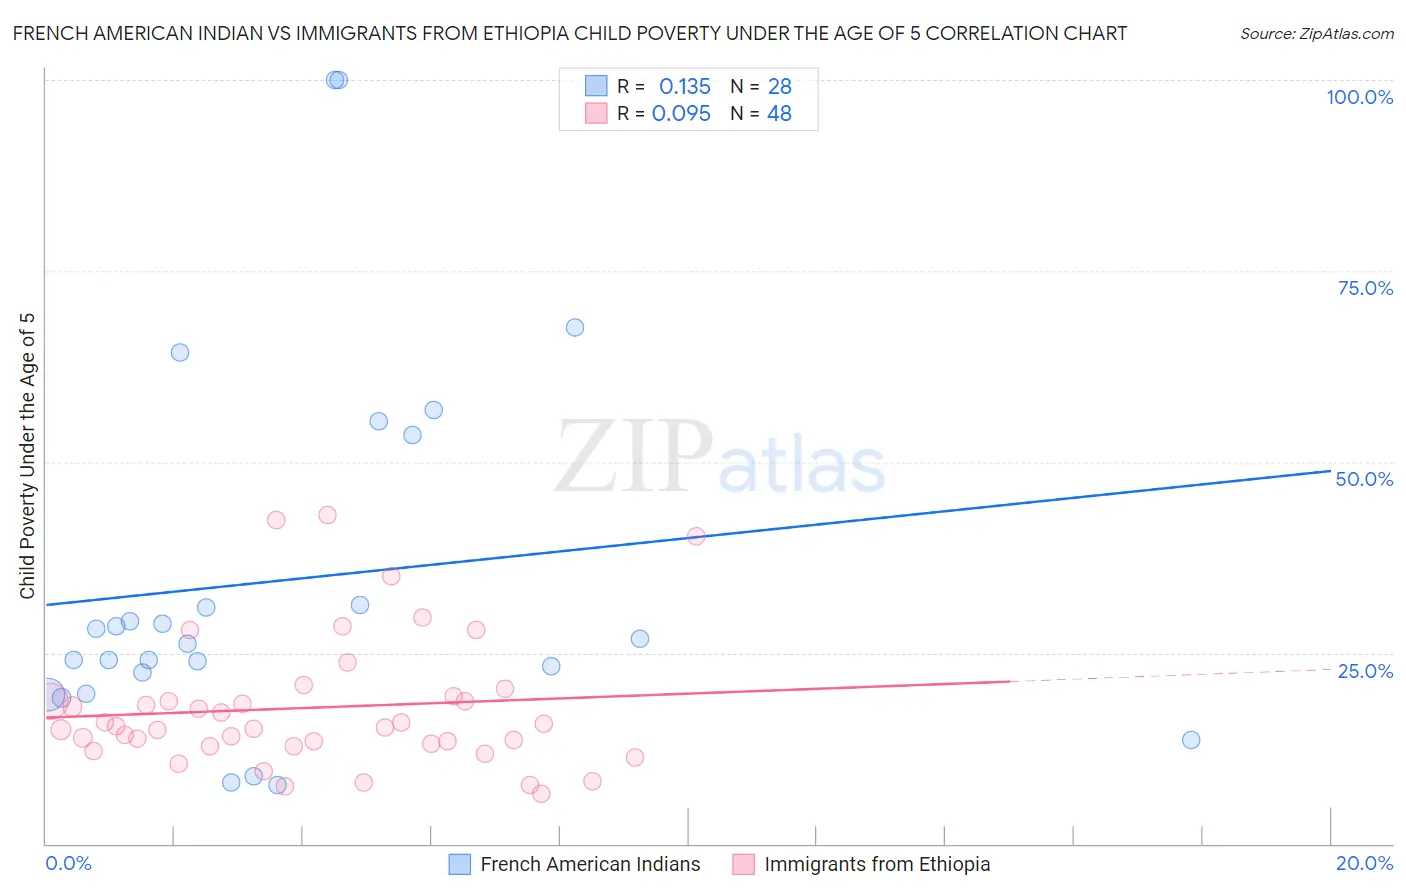 French American Indian vs Immigrants from Ethiopia Child Poverty Under the Age of 5